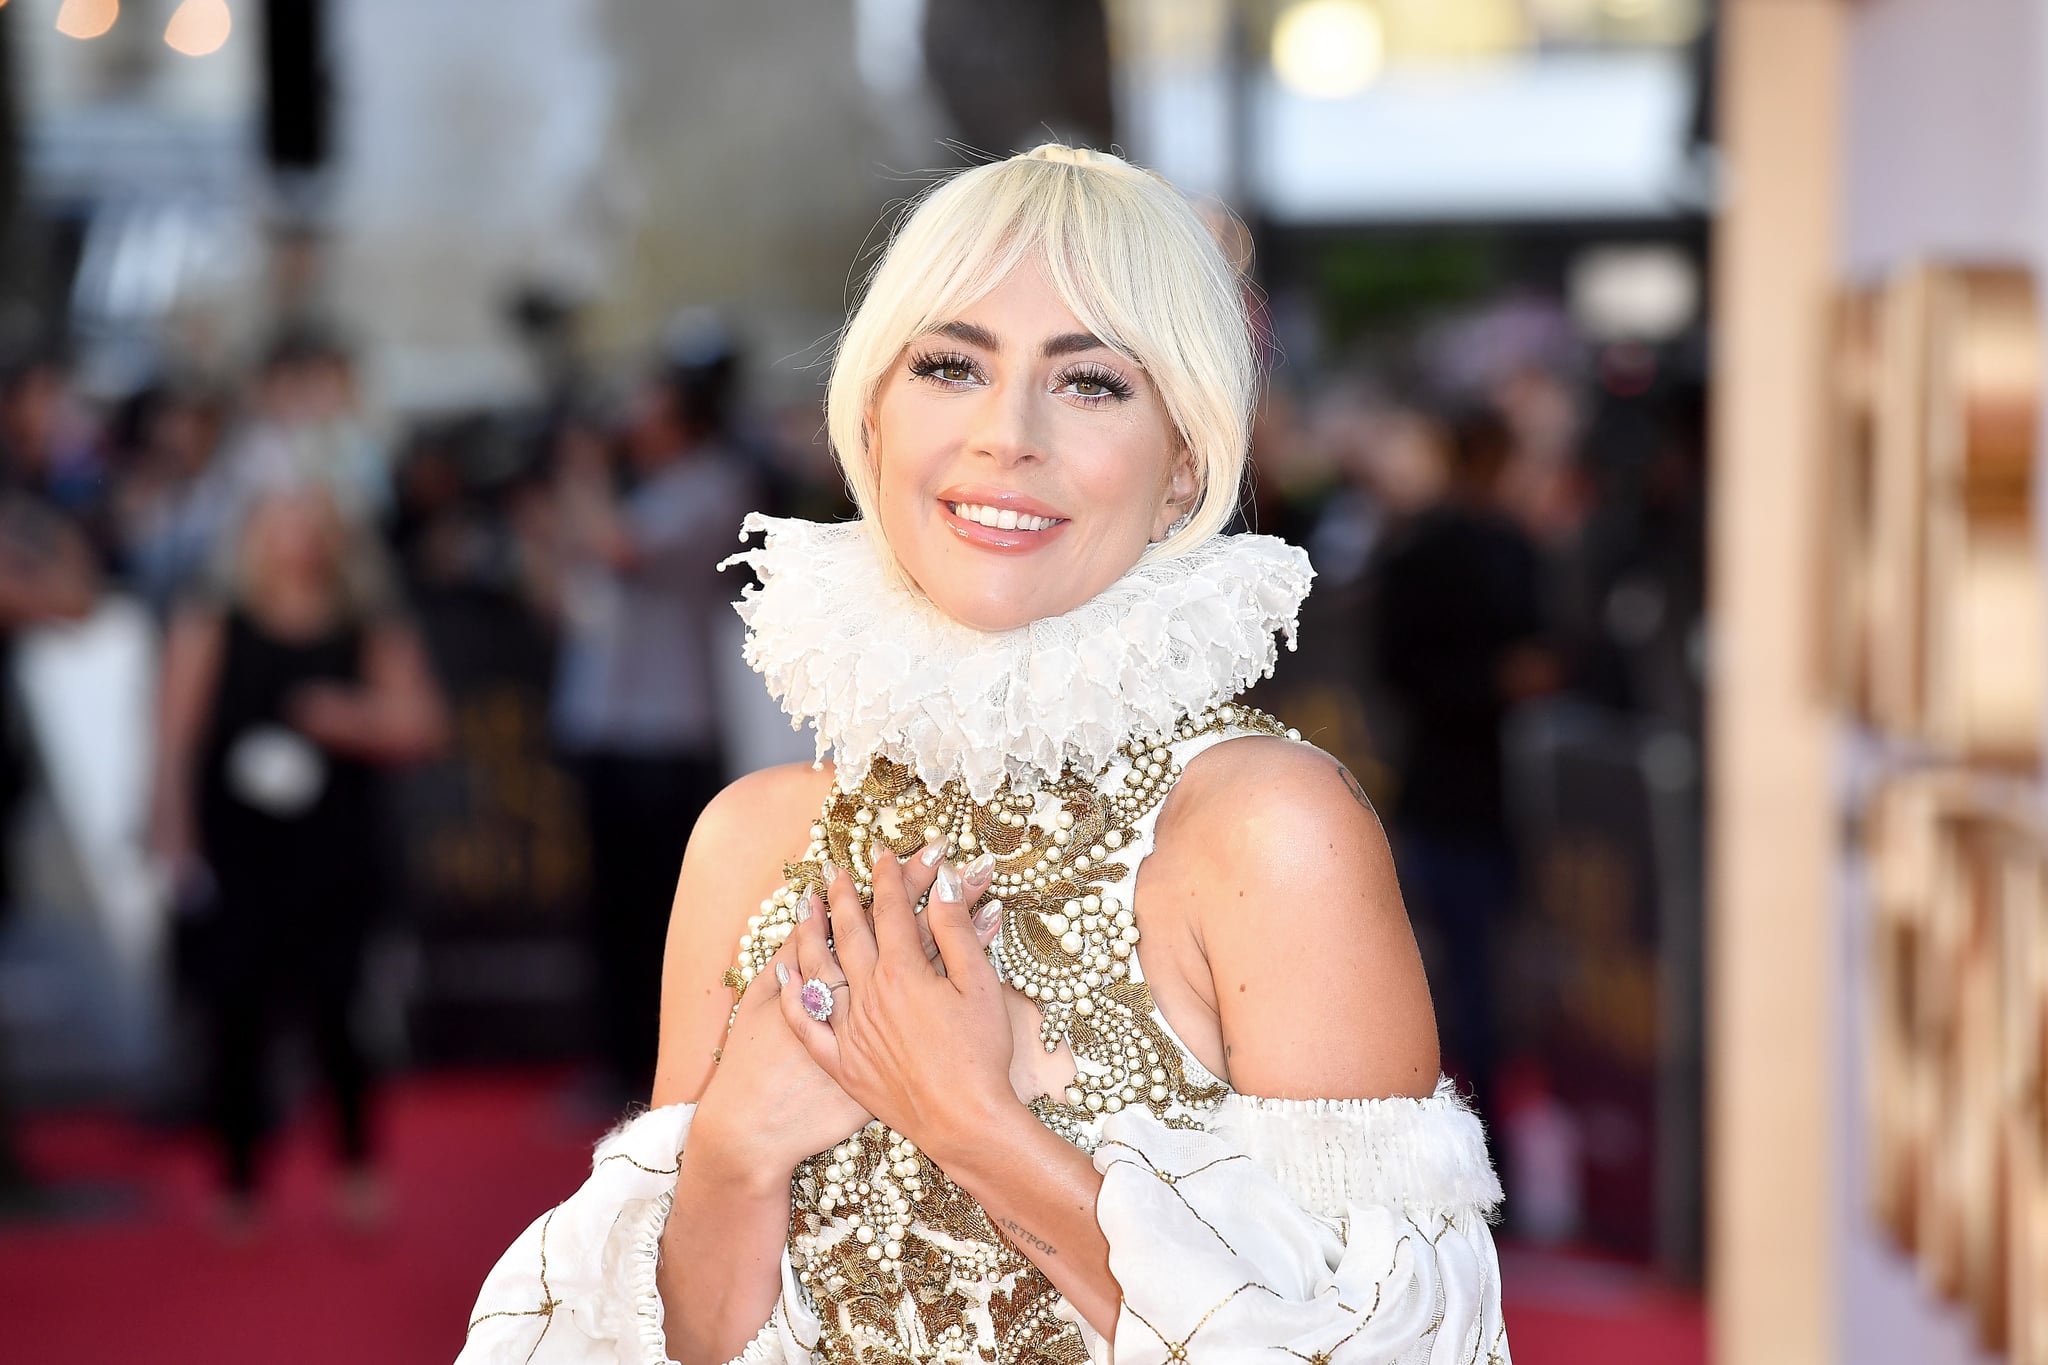 LONDON, ENGLAND - SEPTEMBER 27:  Lady Gaga at 'A Star Is Born' UK Premiere at Vue West End on September 27, 2018 in London, England.  (Photo by Jeff Spicer/Getty Images for Warner Bros)